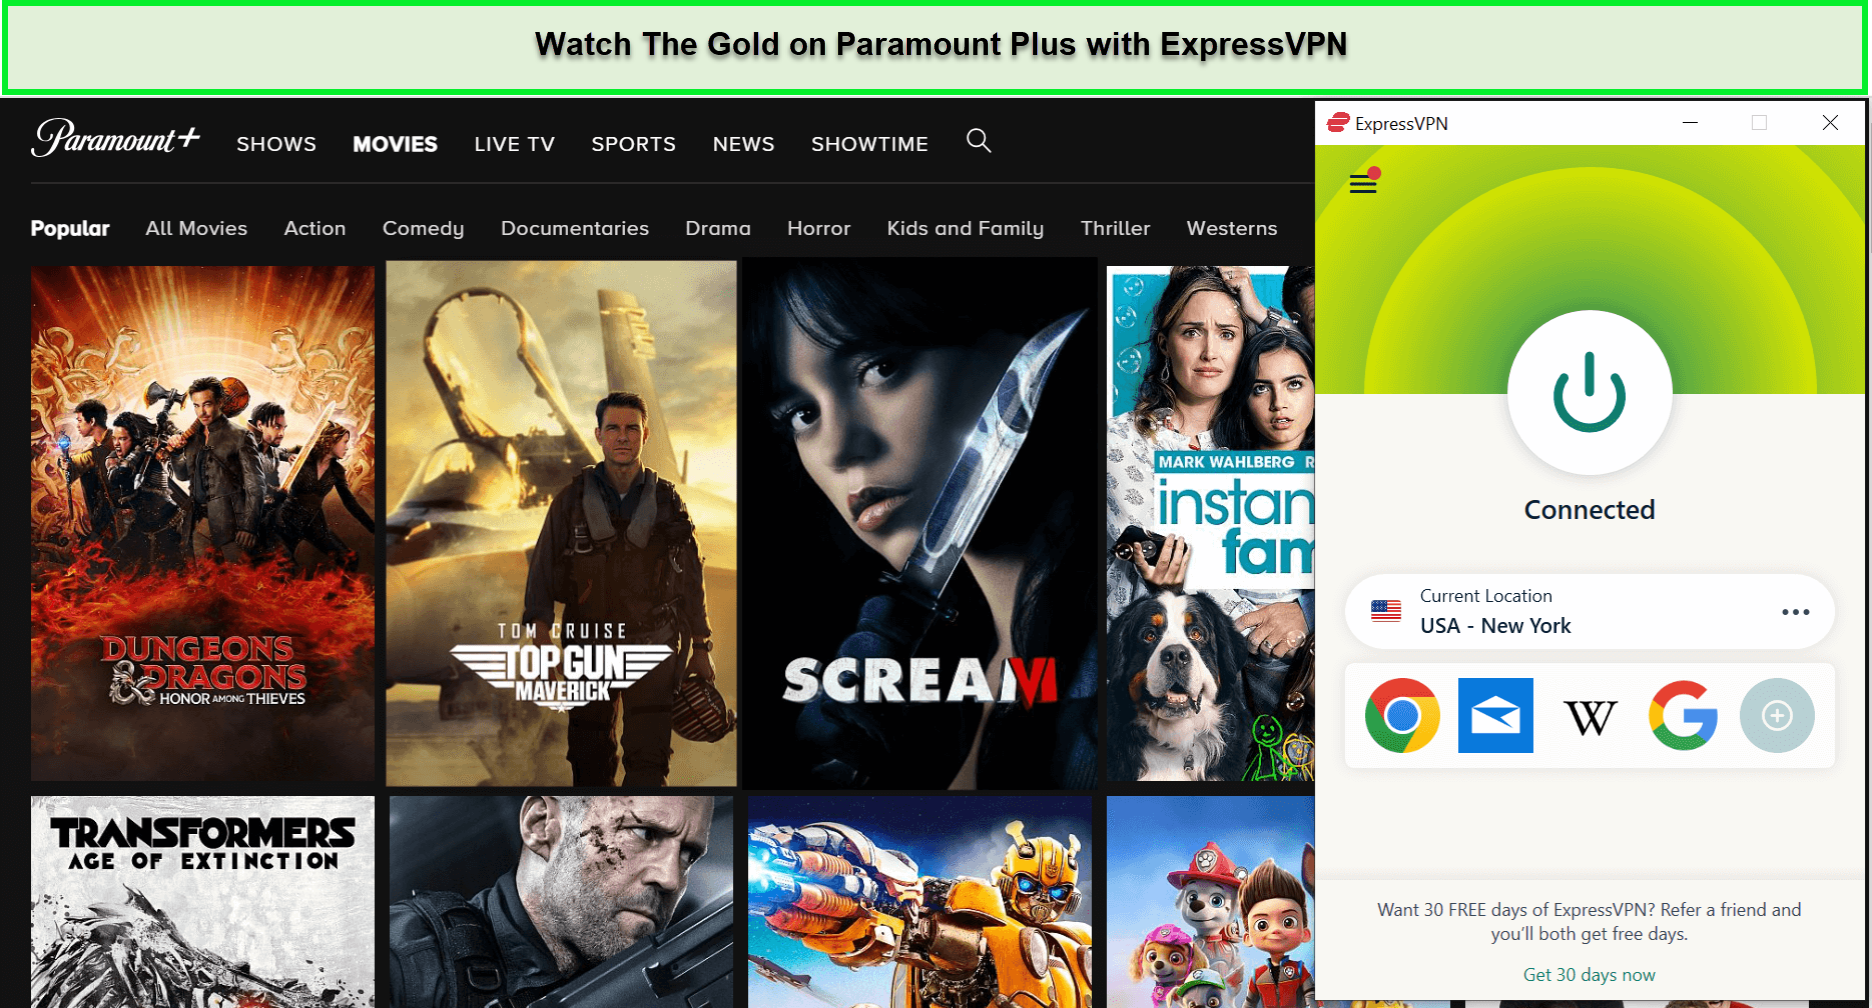 Watch-The-Gold-in-Singapore-on-Paramount-Plus-with-ExpressVPN